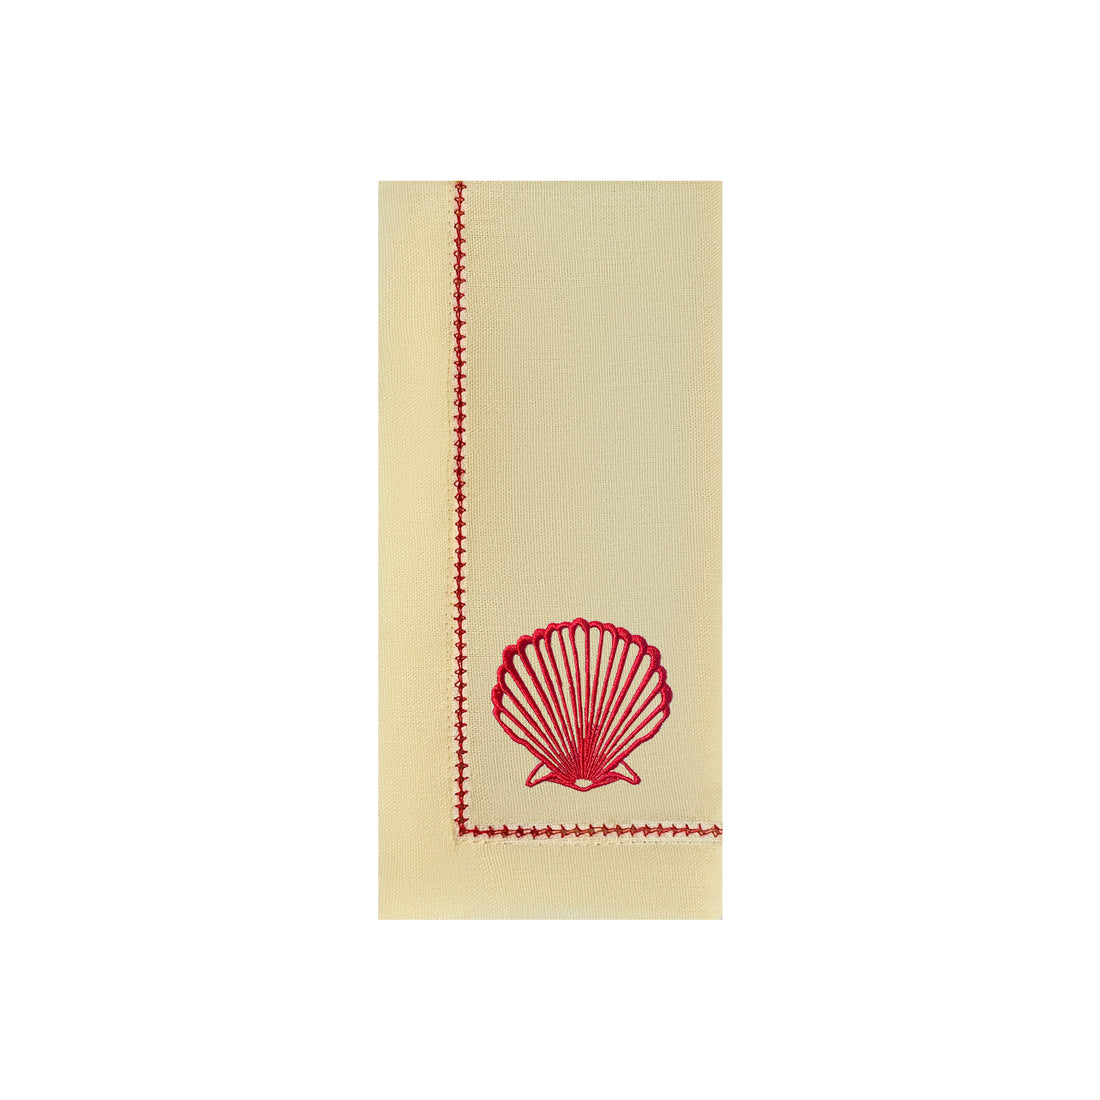 Embroidered Sea Shells & Coral Placemats | Set of 4